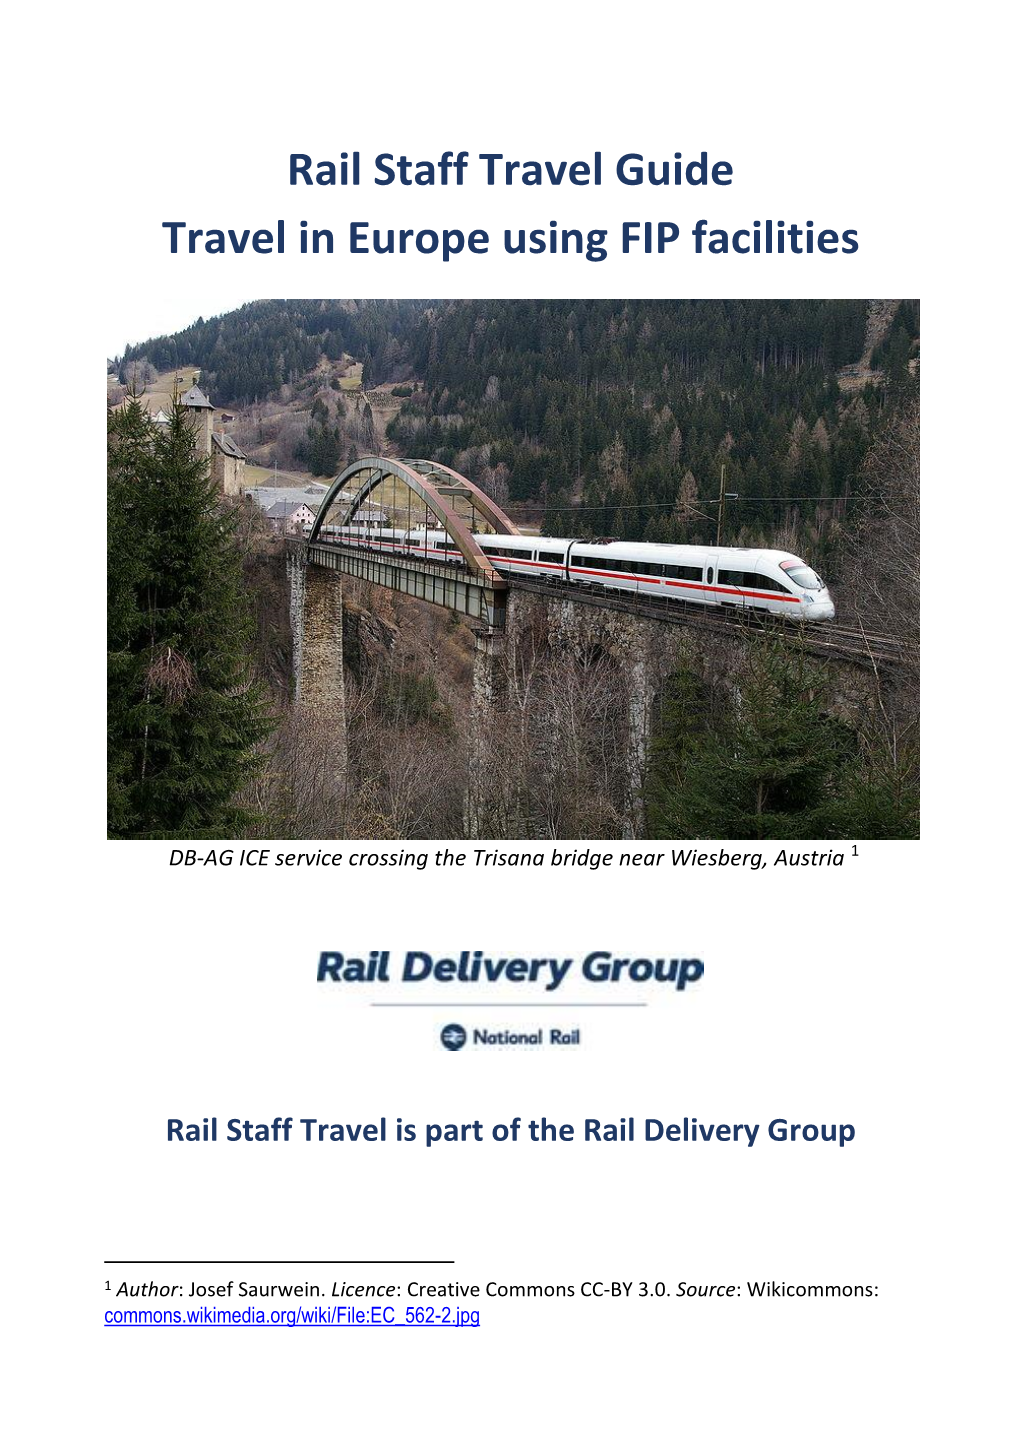 Rail Staff Travel Guide Travel in Europe Using FIP Facilities